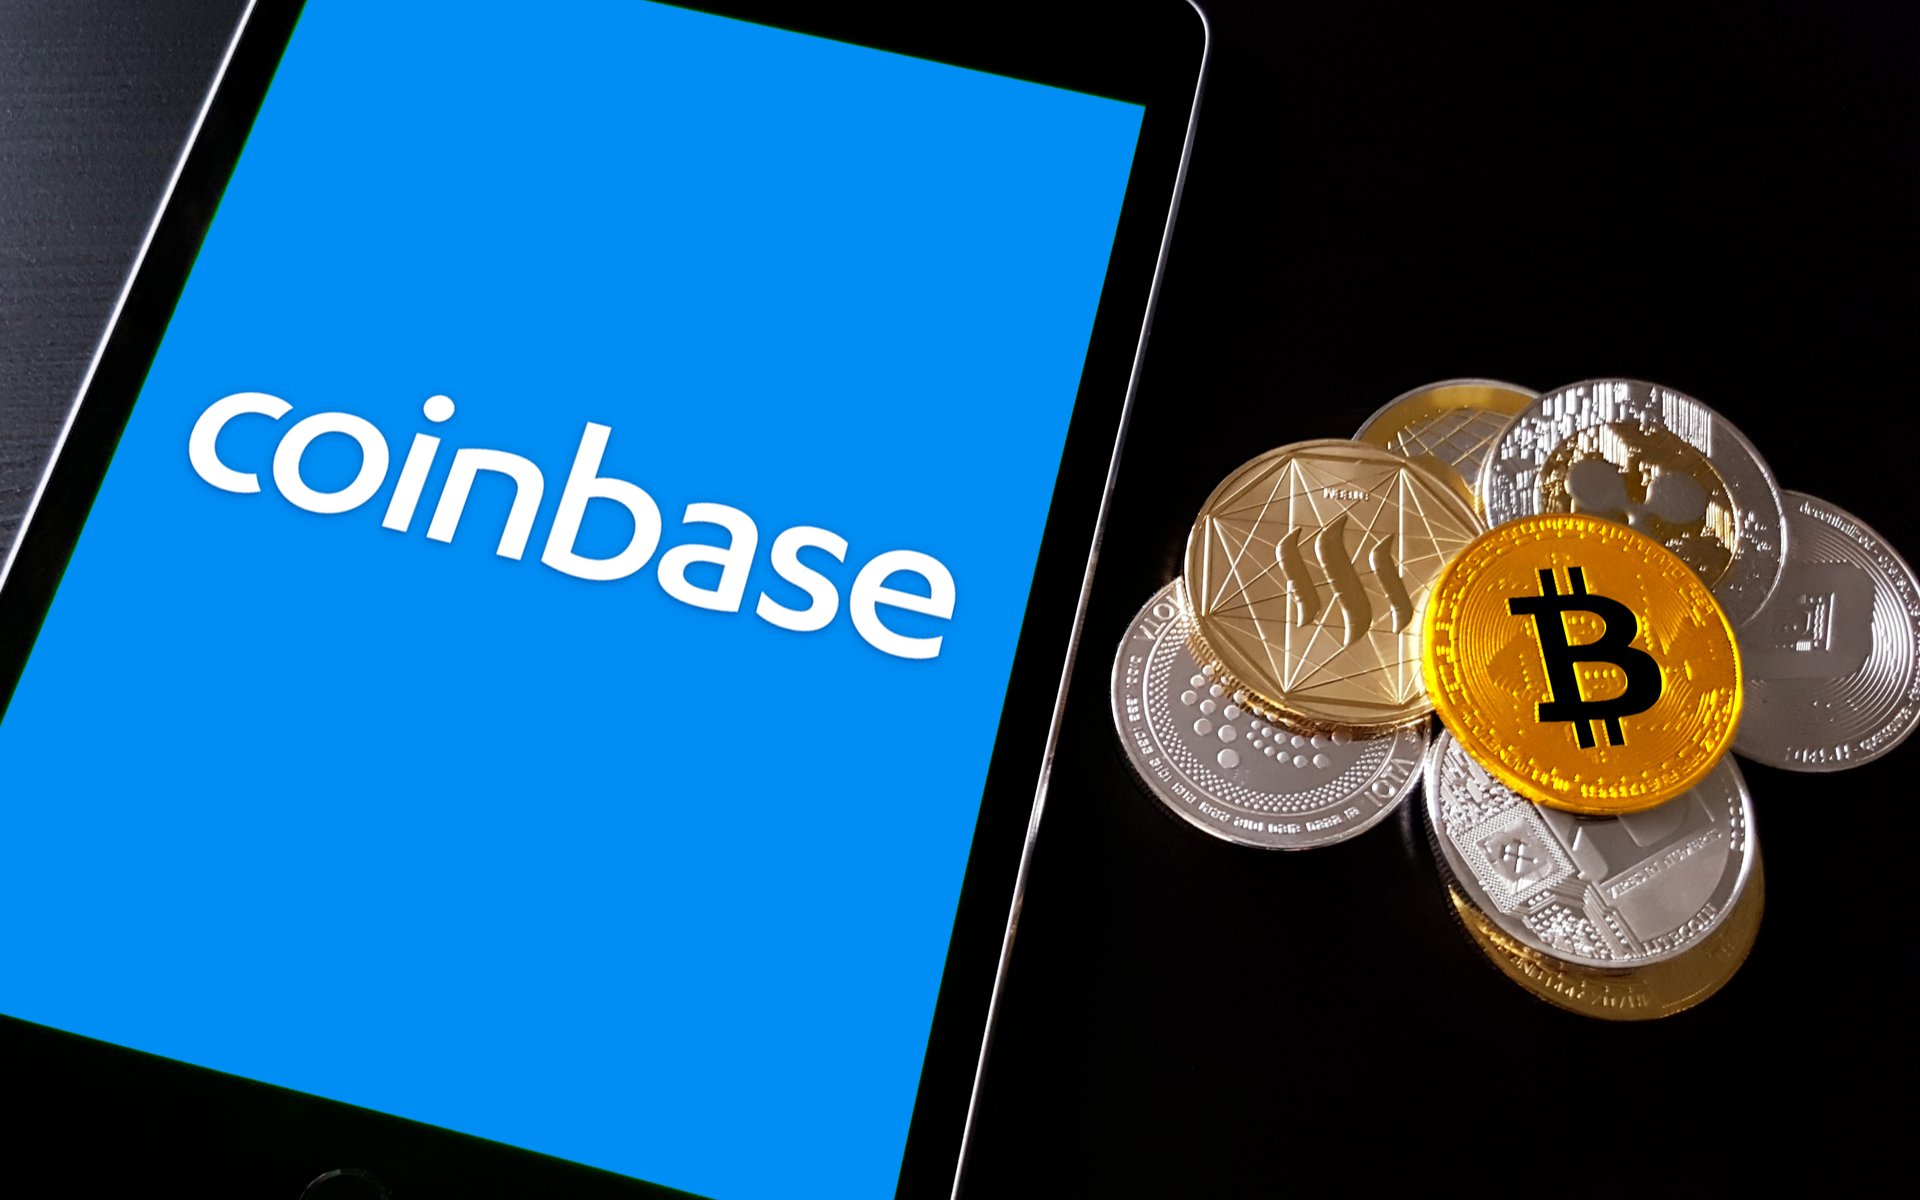 Coinbase, cryptofund closed in order to work on new tools